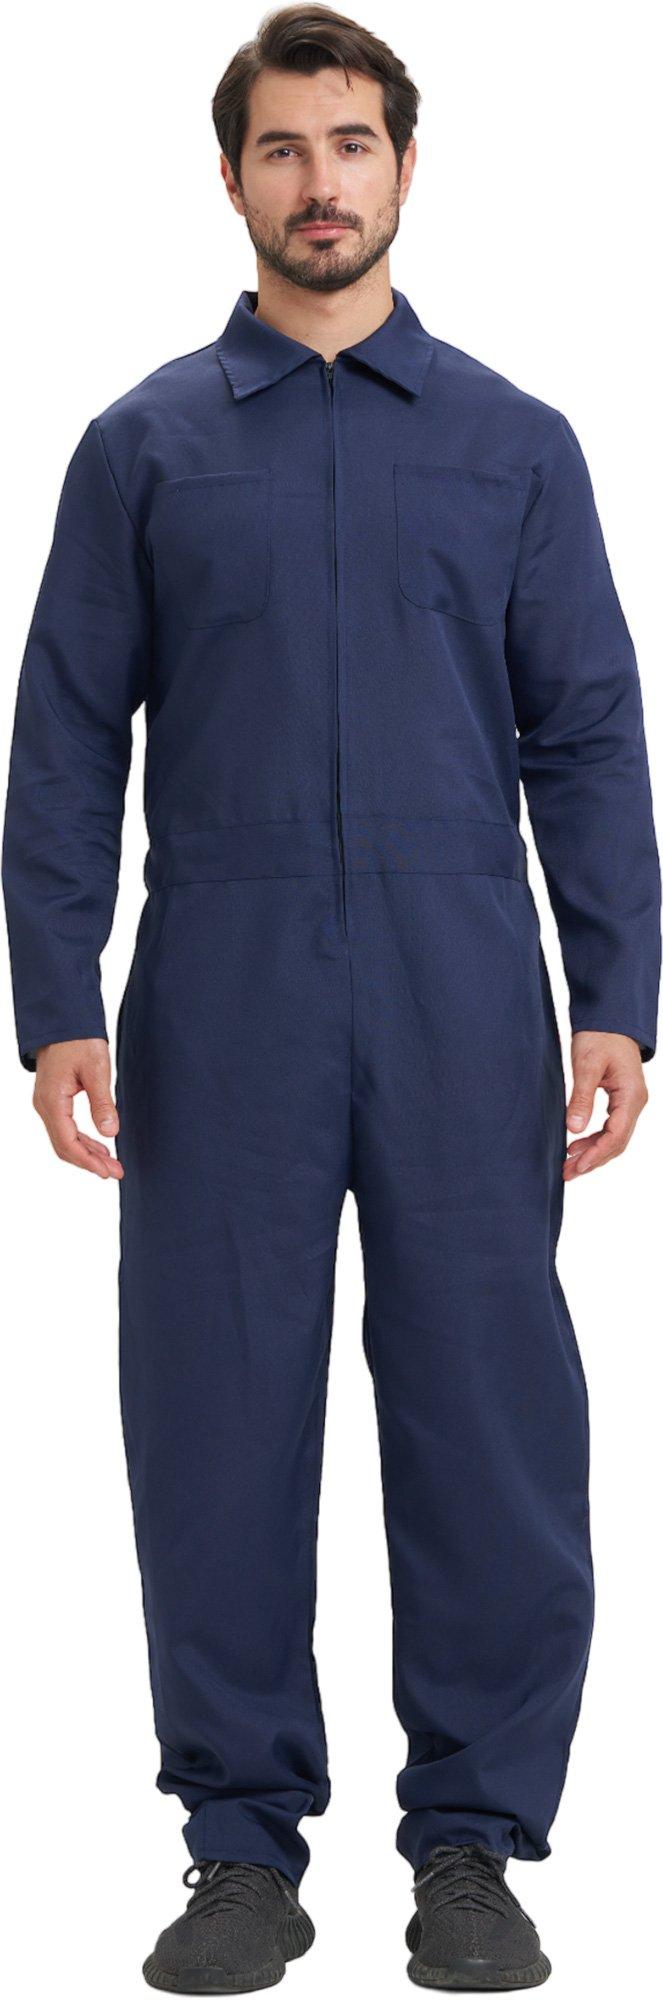 Adult Killer Coveralls | Party City